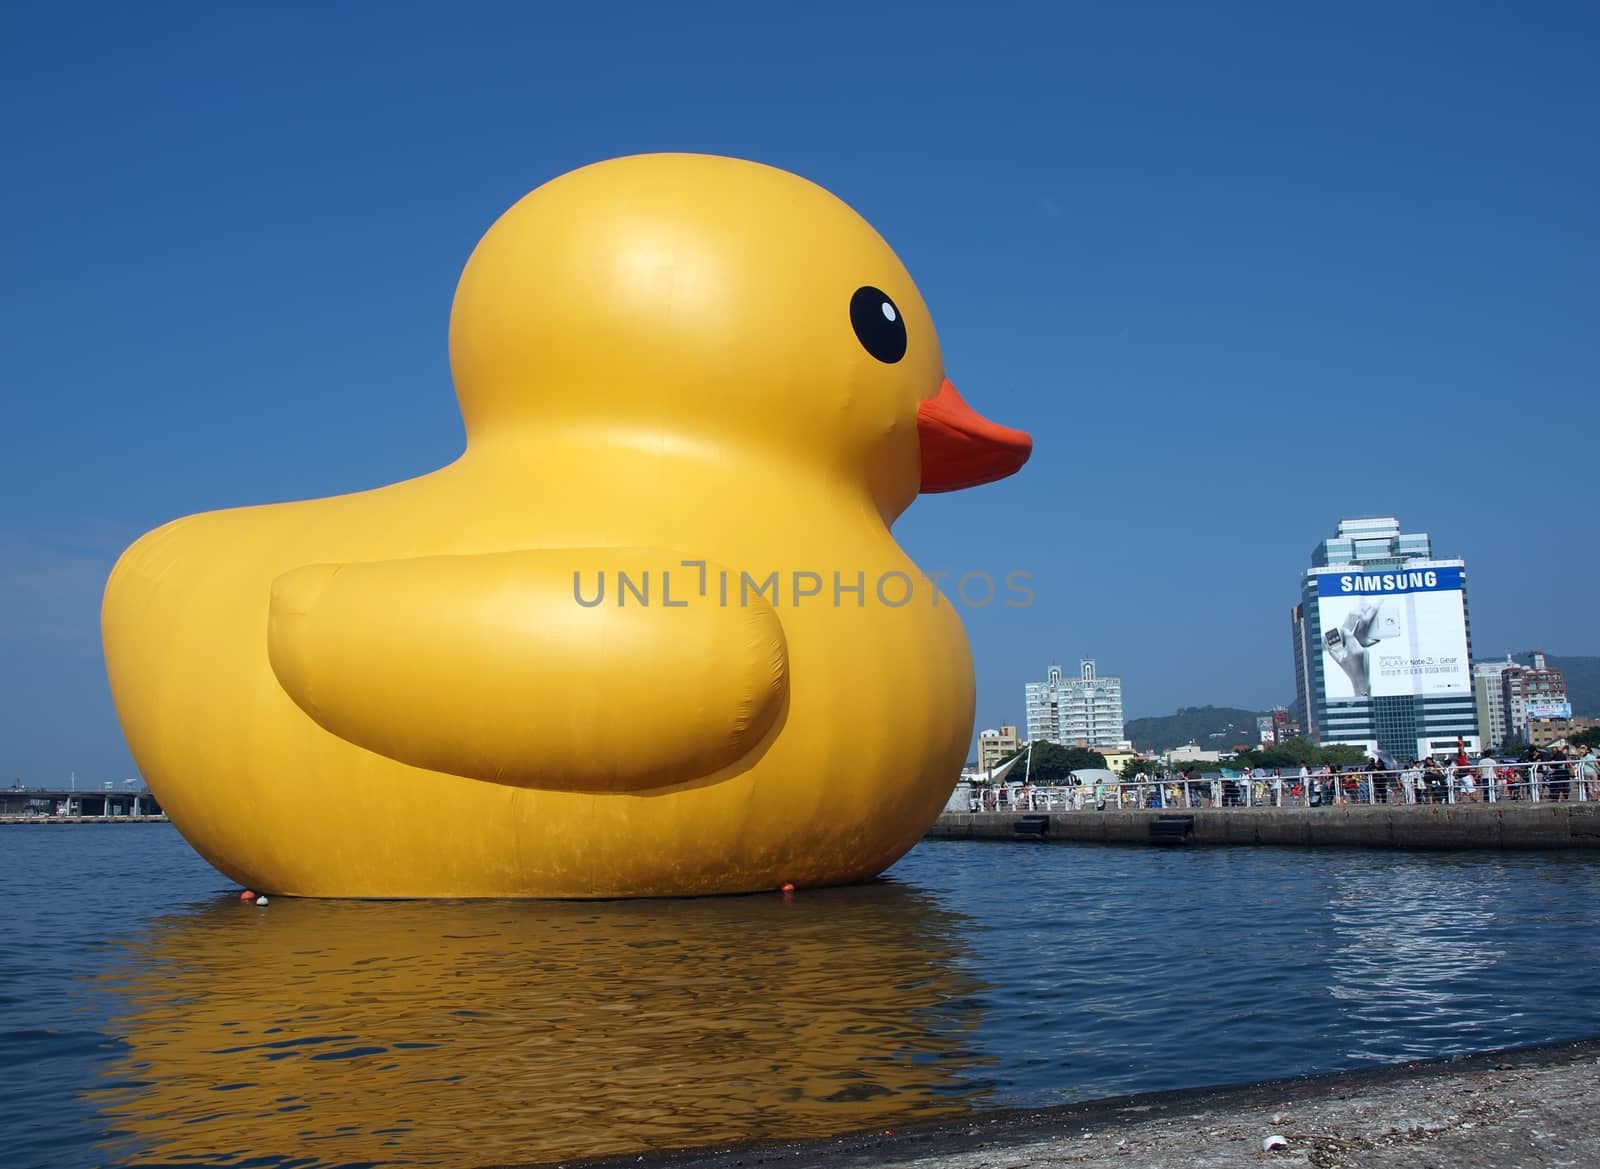 KAOHSIUNG, TAIWAN -- SEPTEMBER 29: Visitors flock to see the giant rubber duck designed by Dutch artist Hofman while it is on display at the Glory Pier on September 29, 2013 in Kaohsiung